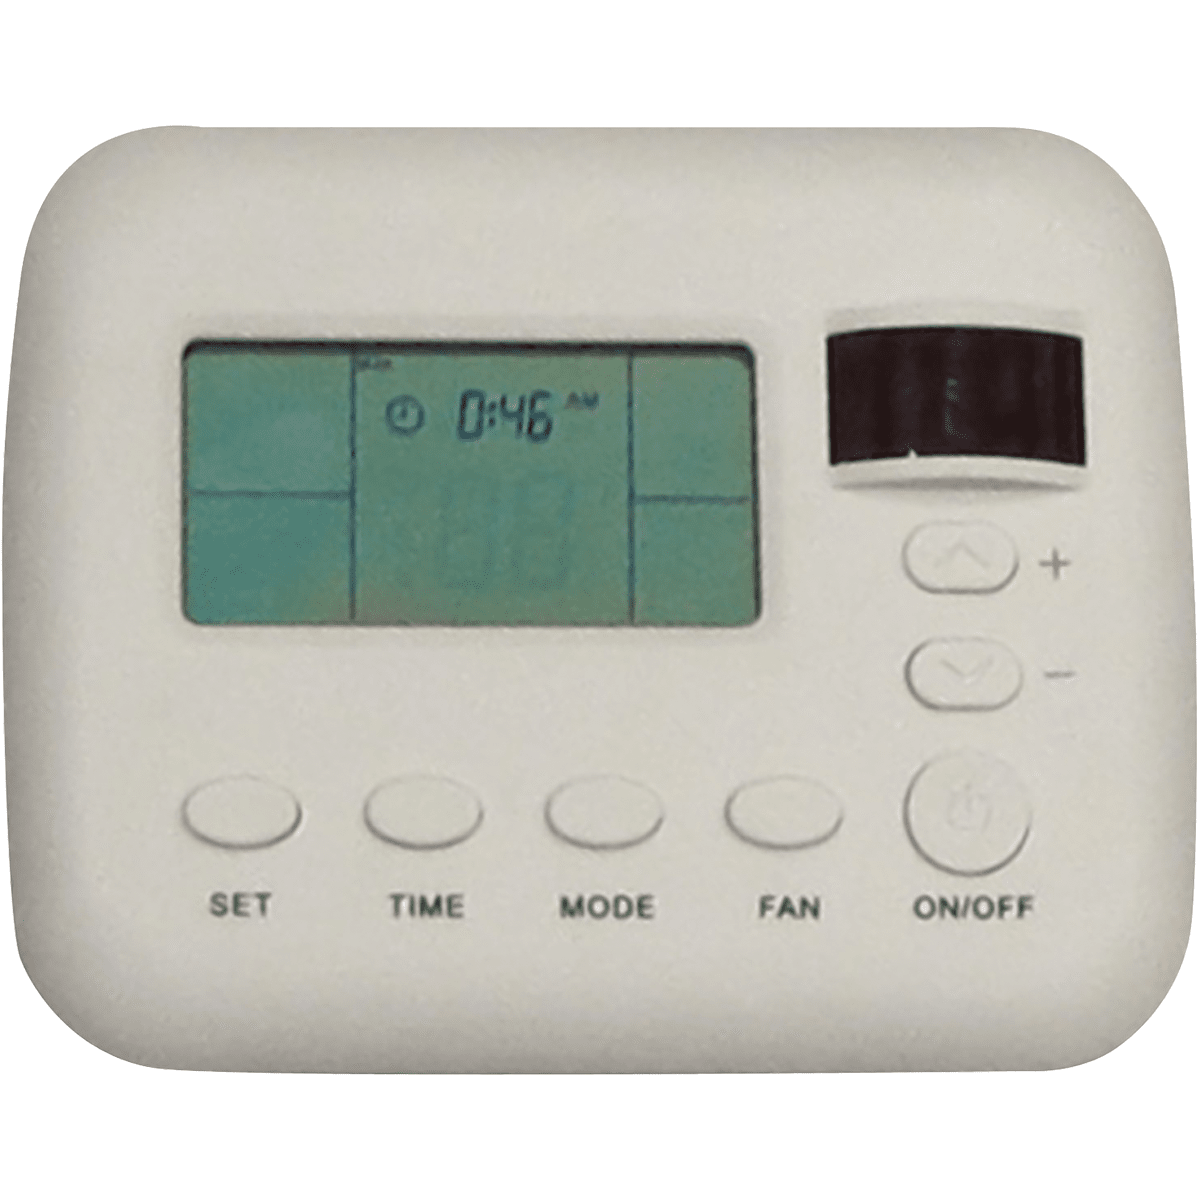 Comfort-aire Ptac Wireless Thermostat 7602-536